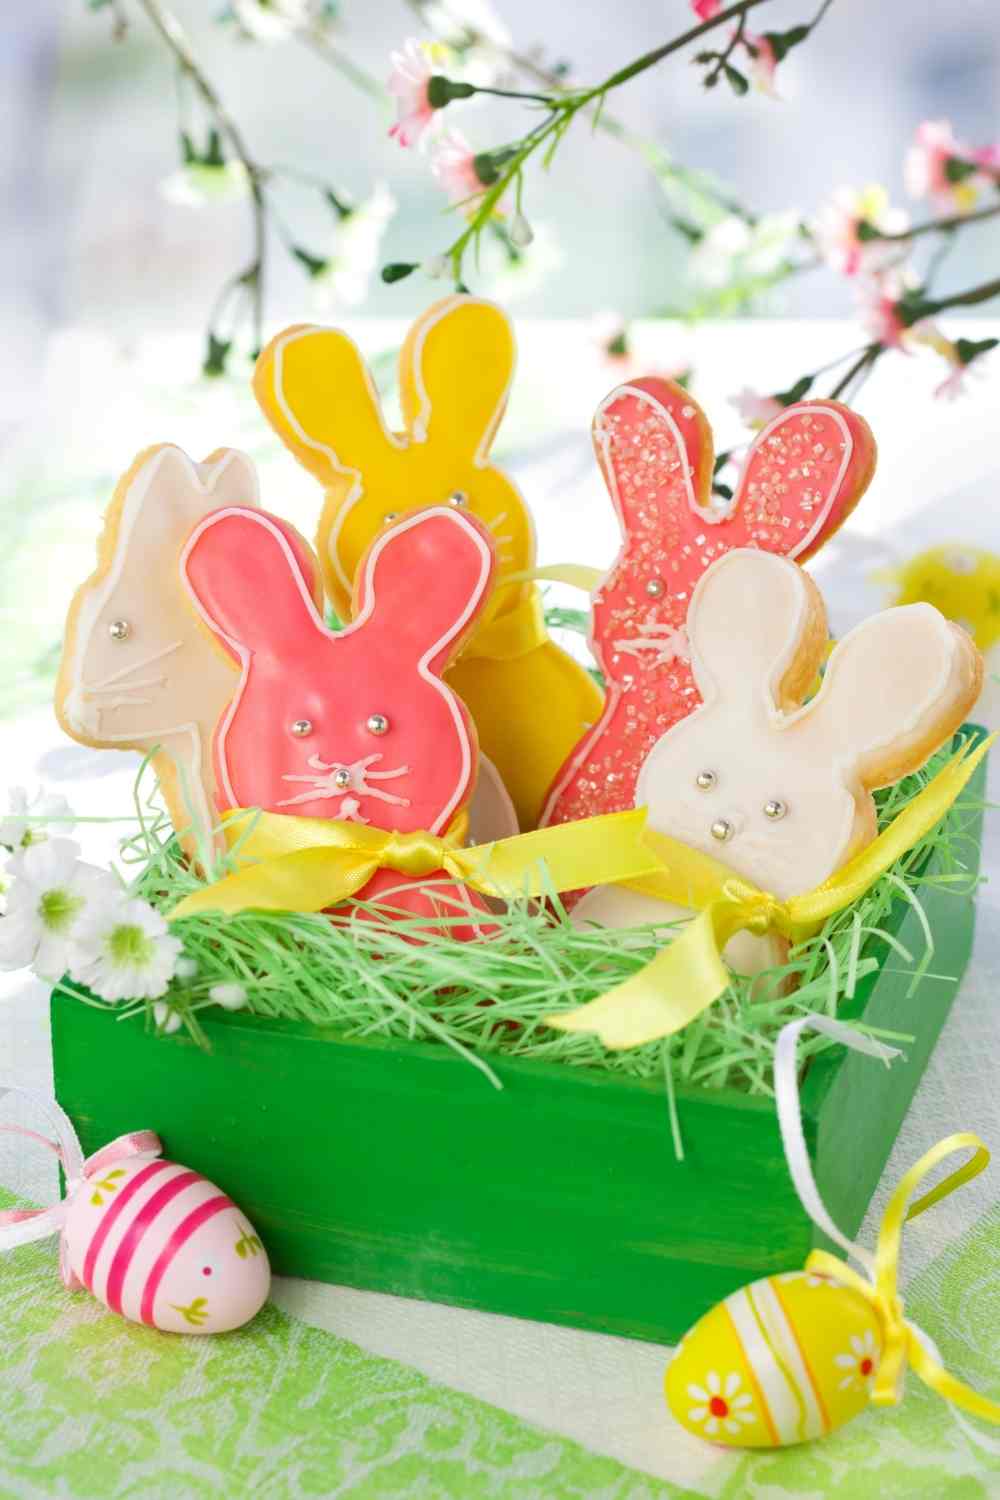 Bunny cut out easter cookies